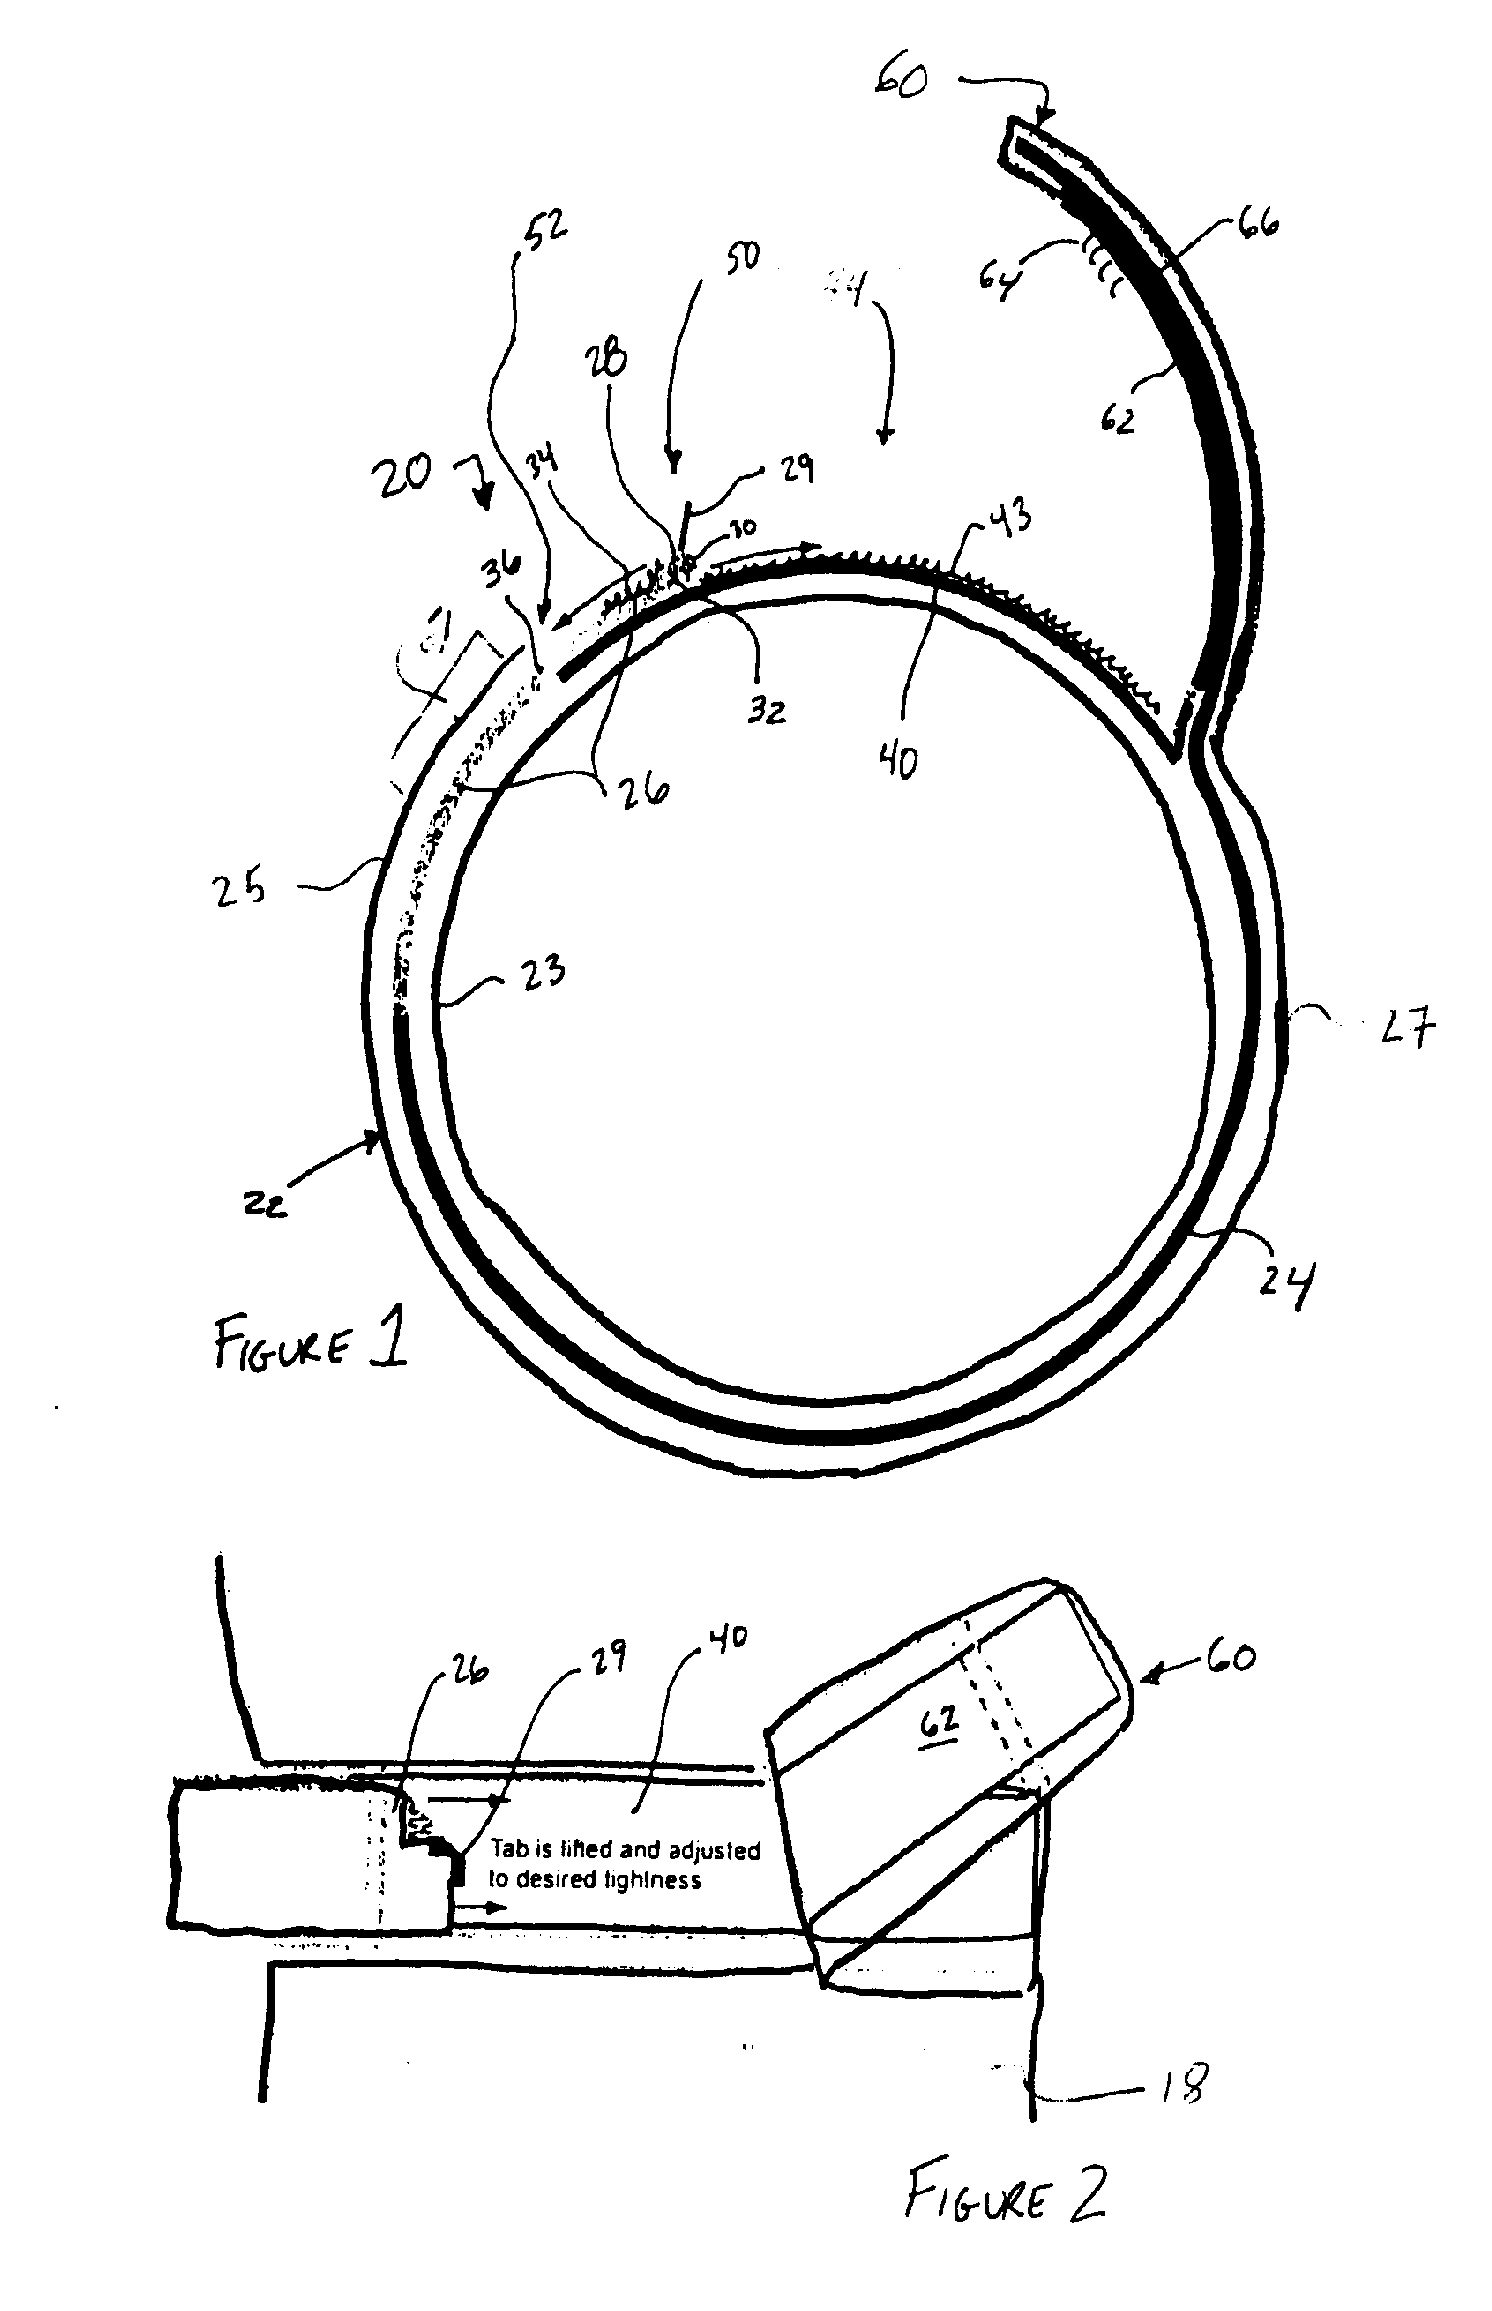 Adjustable Cuff System for Garments